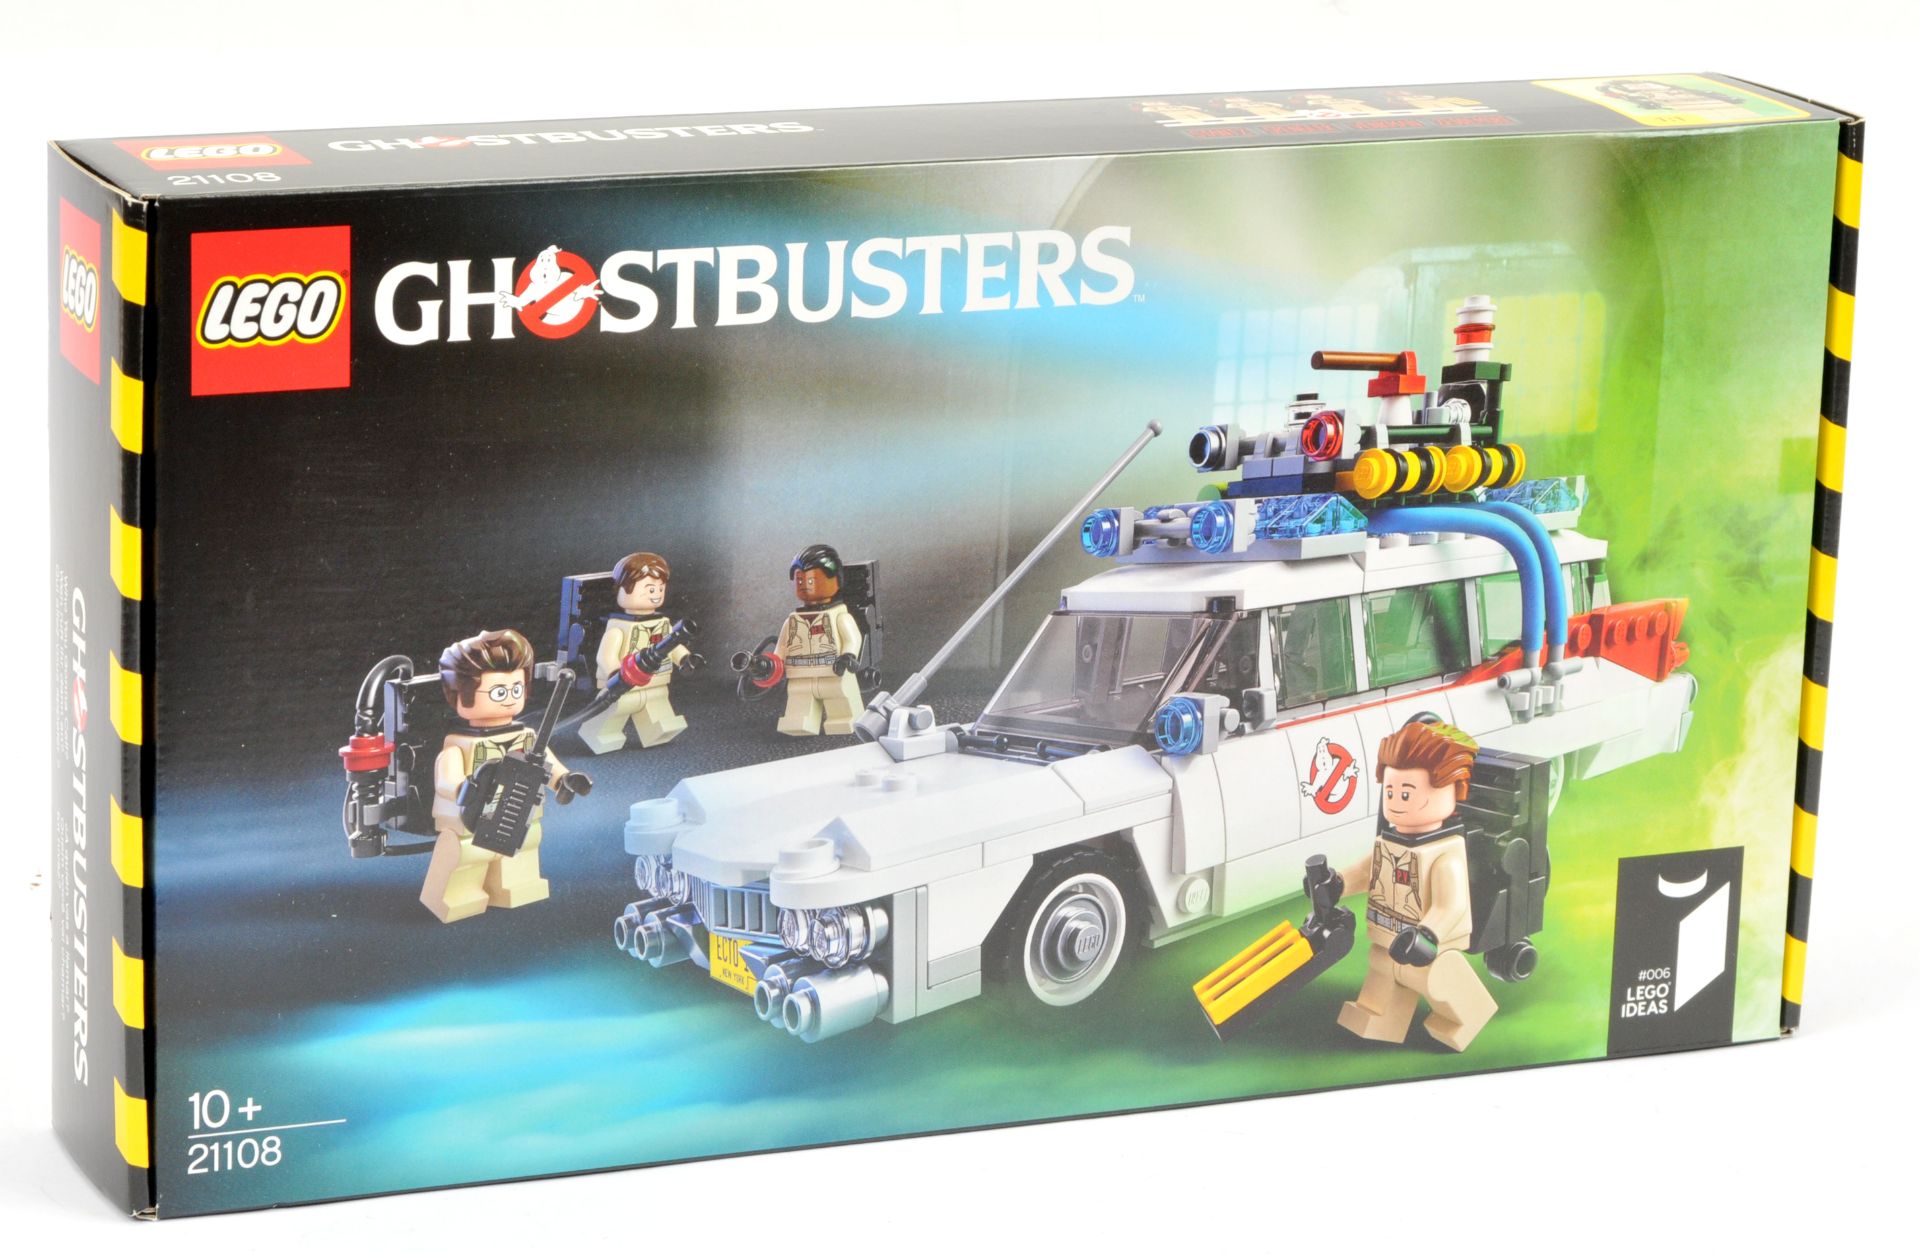 Lego 21108 Ghostbusters Ecto-1 within Excellent Plus sealed packaging (light crease on one corner).